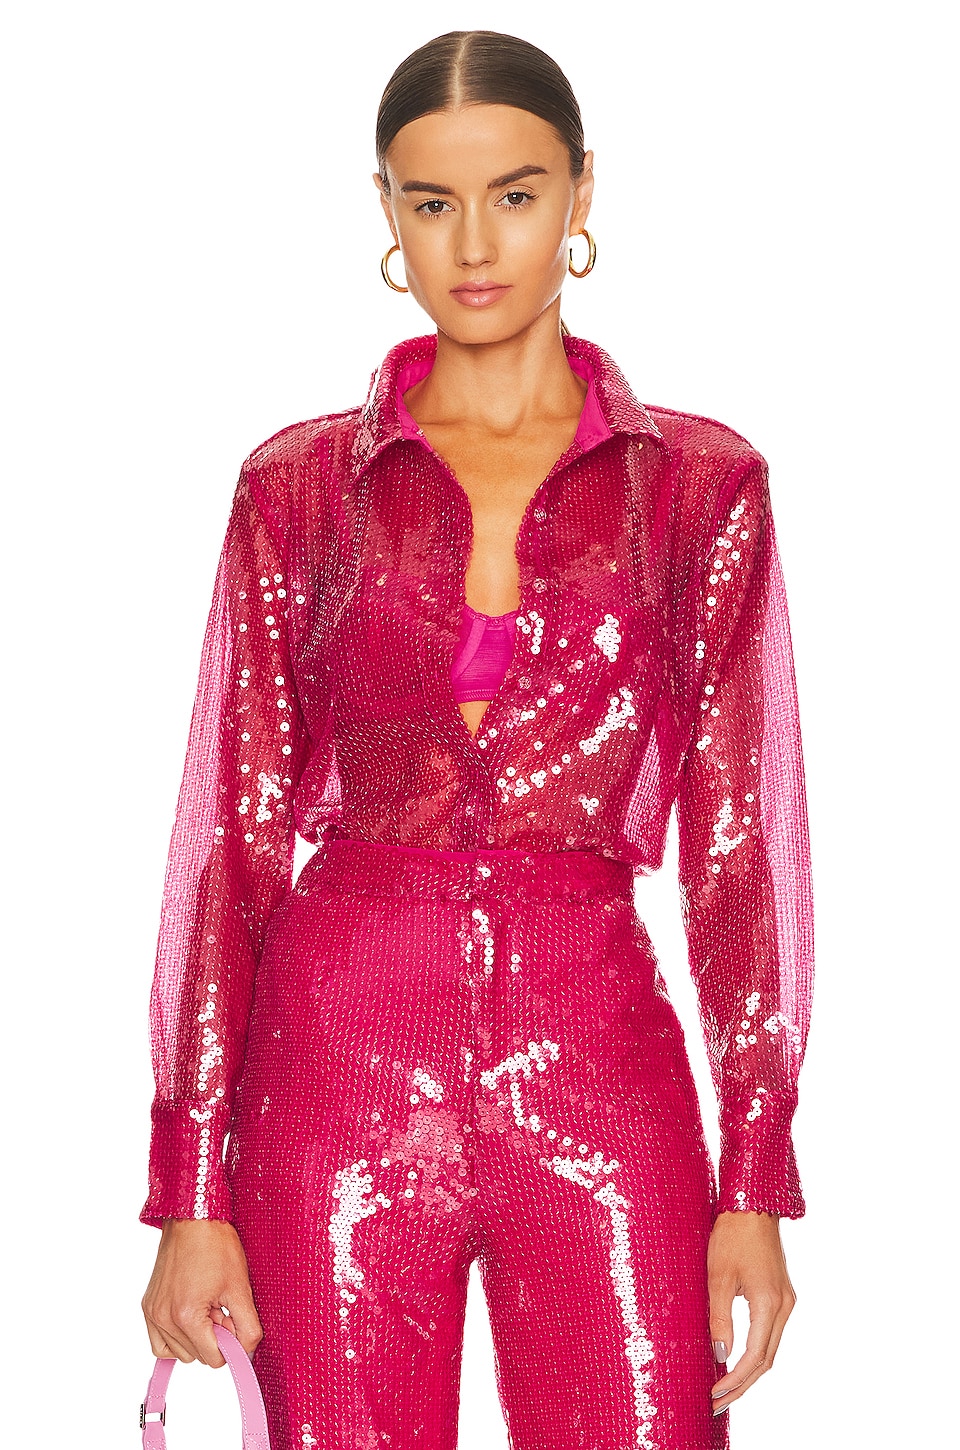 Топ MORE TO COME Wyatt Button Down, цвет Hot Pink топ more to come wyatt button down цвет hot pink